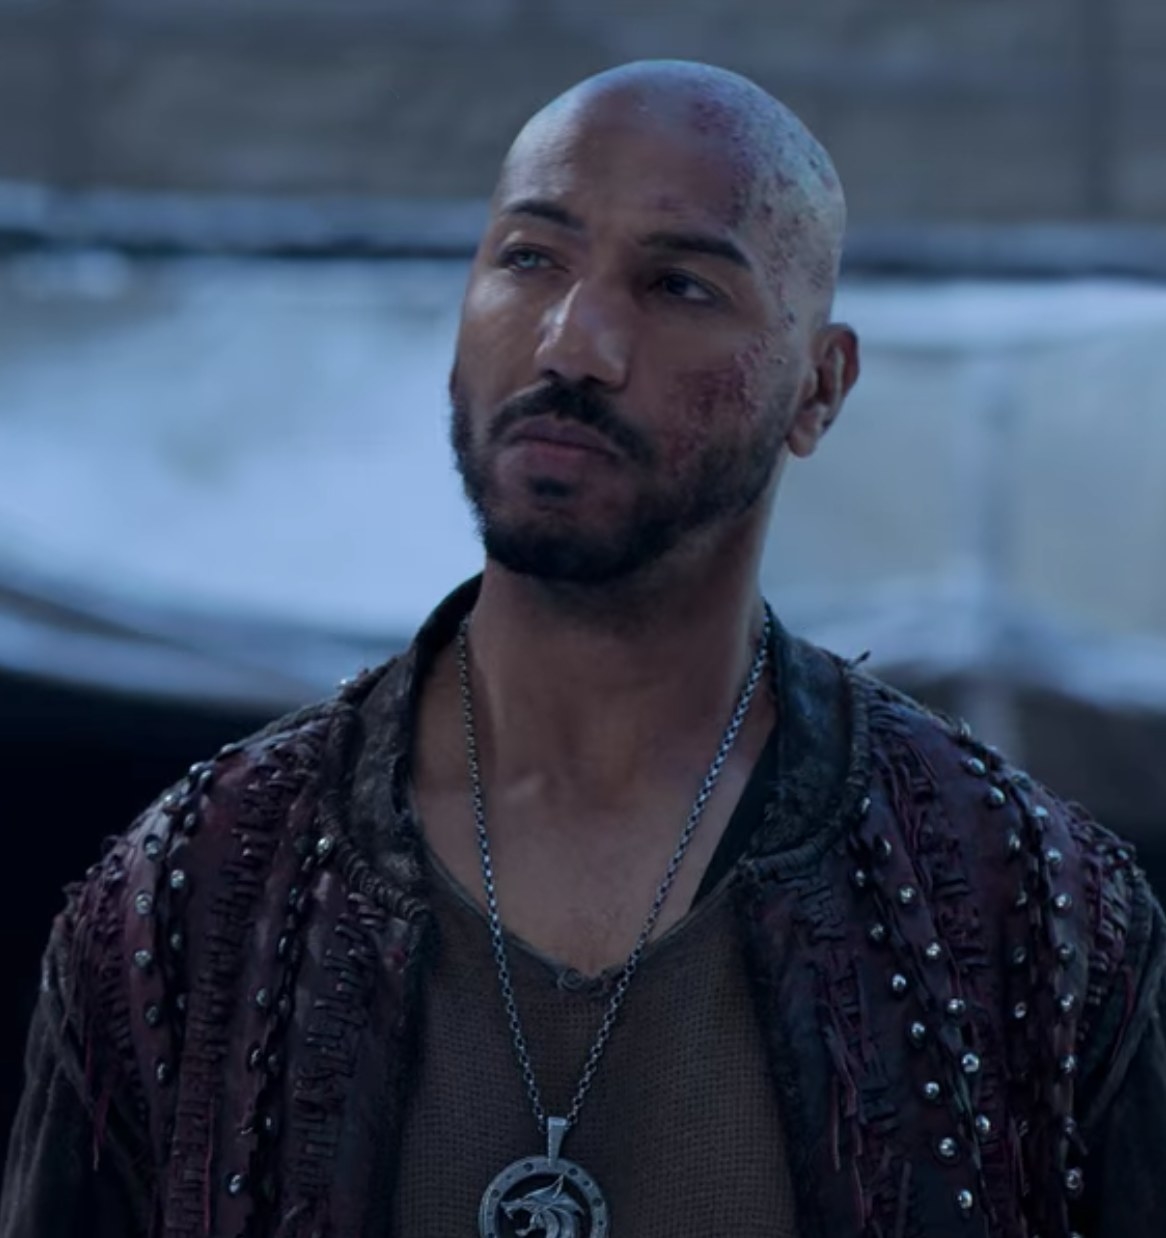 Yasen Atour as Coen in Season 2 of &quot;The Witcher&quot;